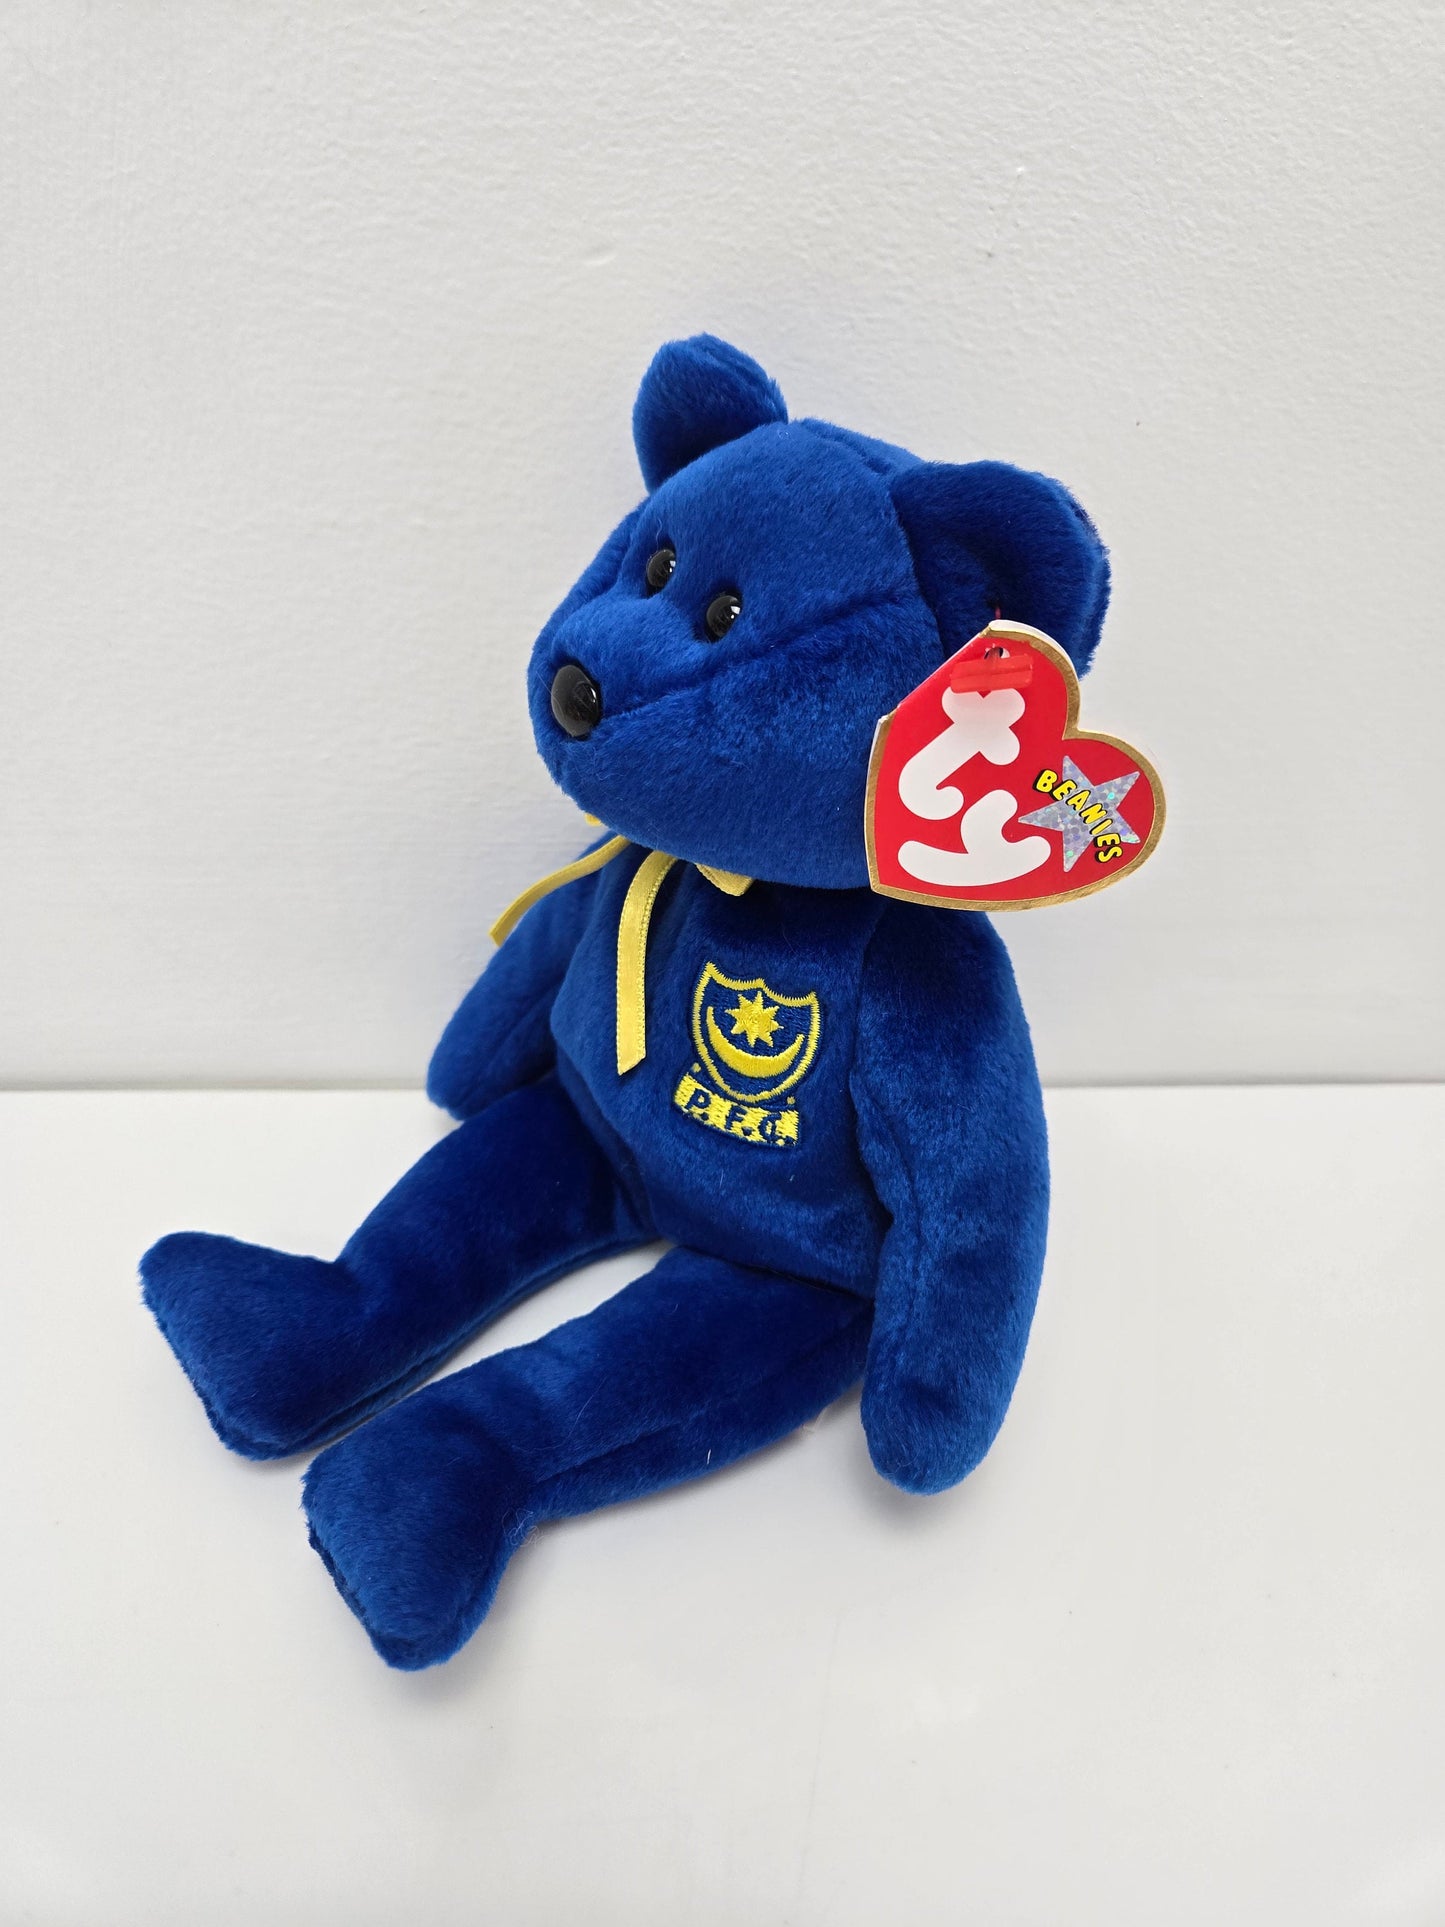 Ty Beanie Baby “Pompey” the Royal Blue Bear - UK Portsmouth Football Club Europe Exclusive (8.5 inch)